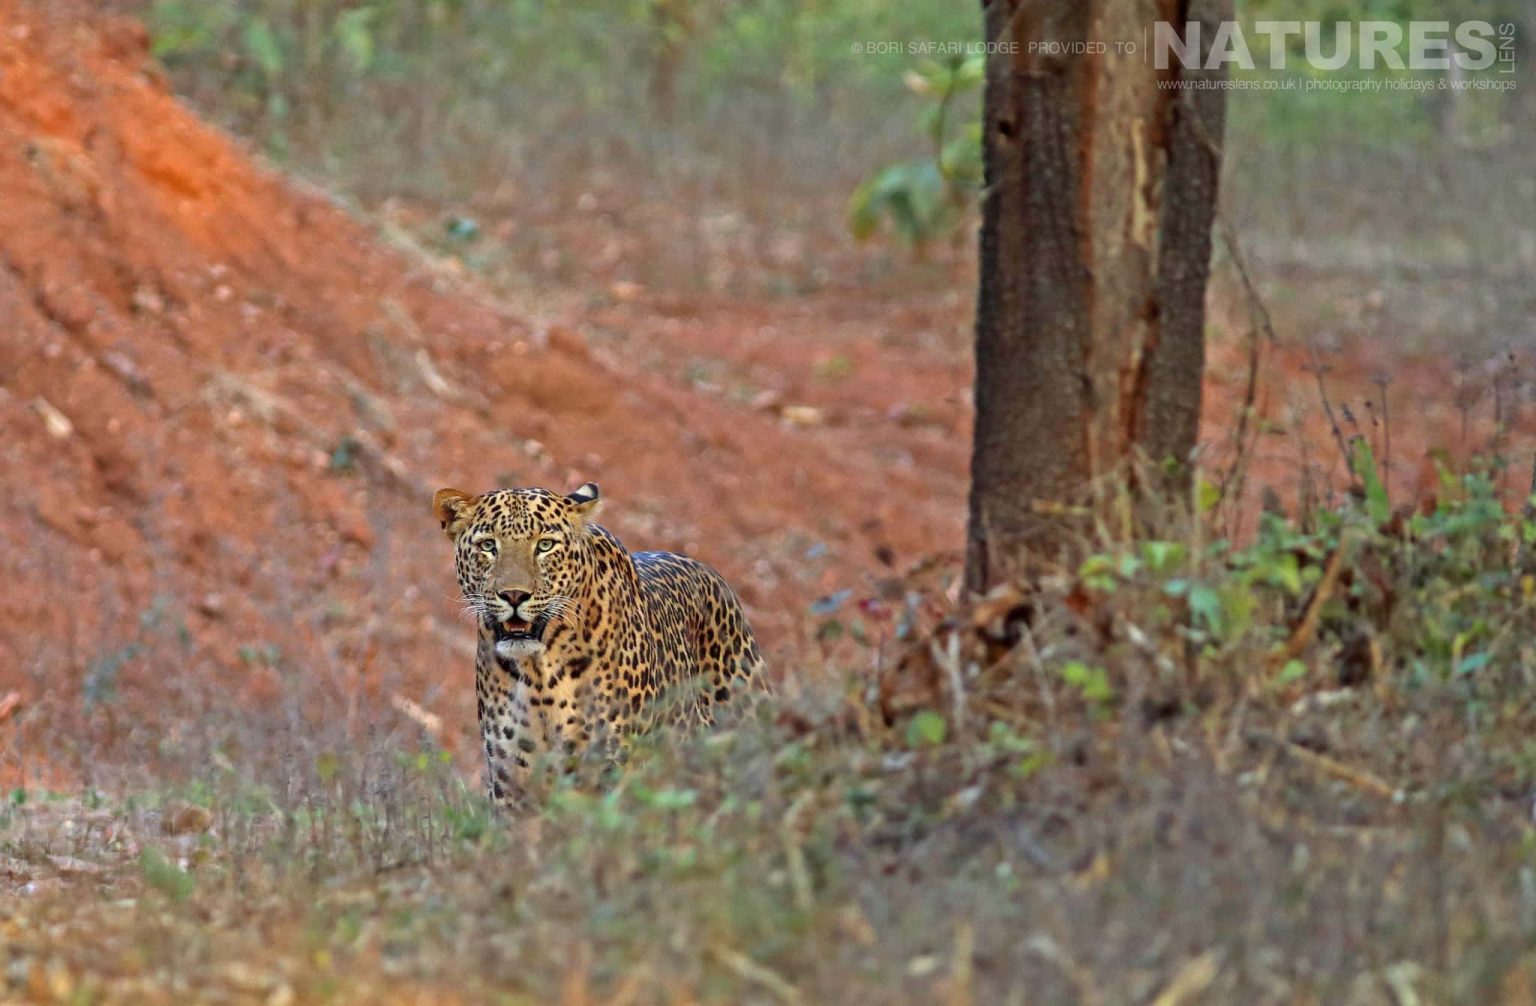 A leopard photographed within the Bori Wildlife Reserve - one of the locations used during the NaturesLens Wildlife of Madhya Pradesh photography holiday